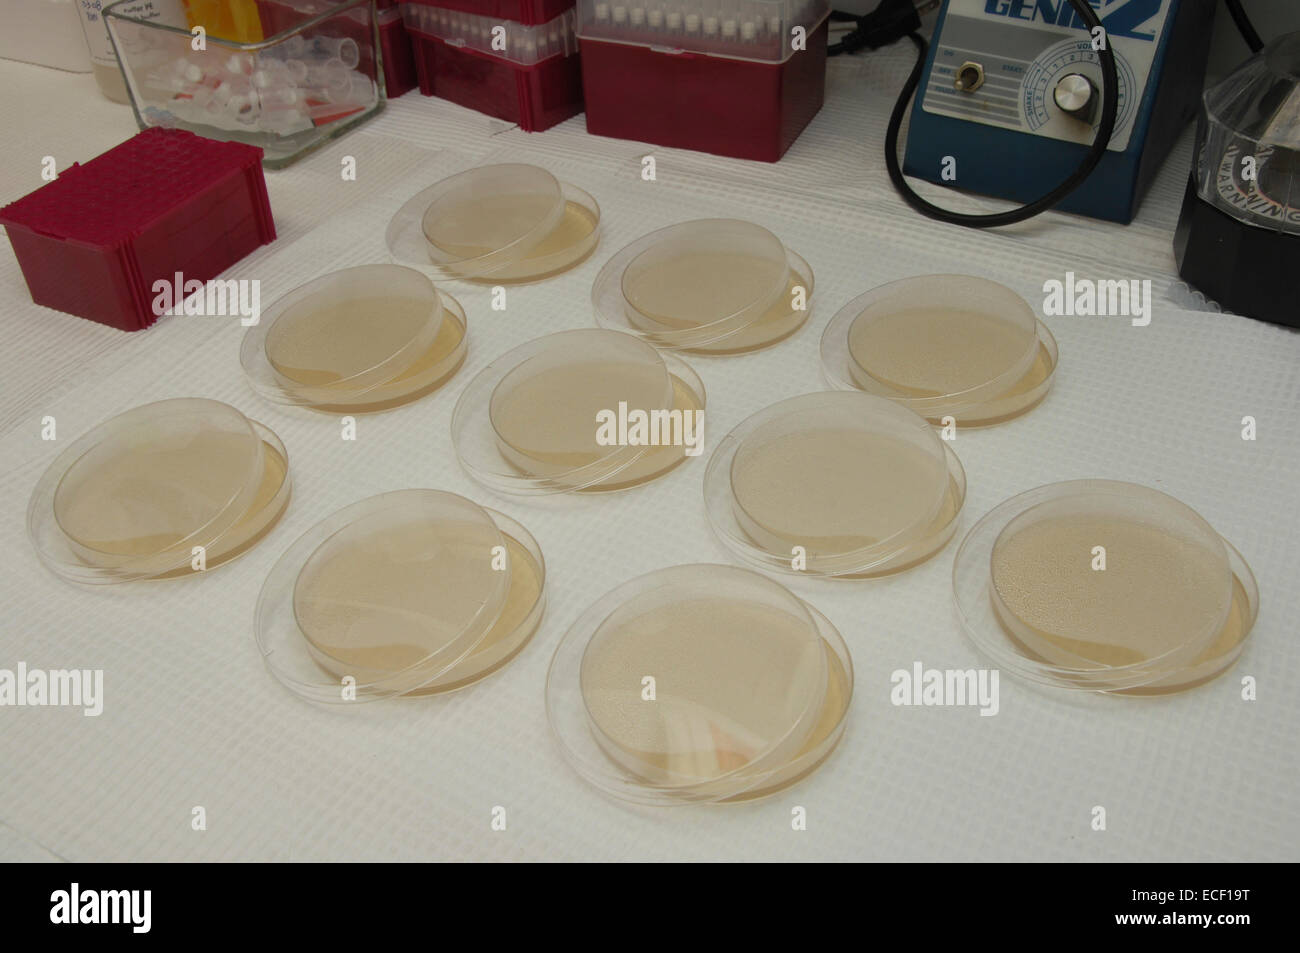 Cloning dishes in research lab. Stock Photo